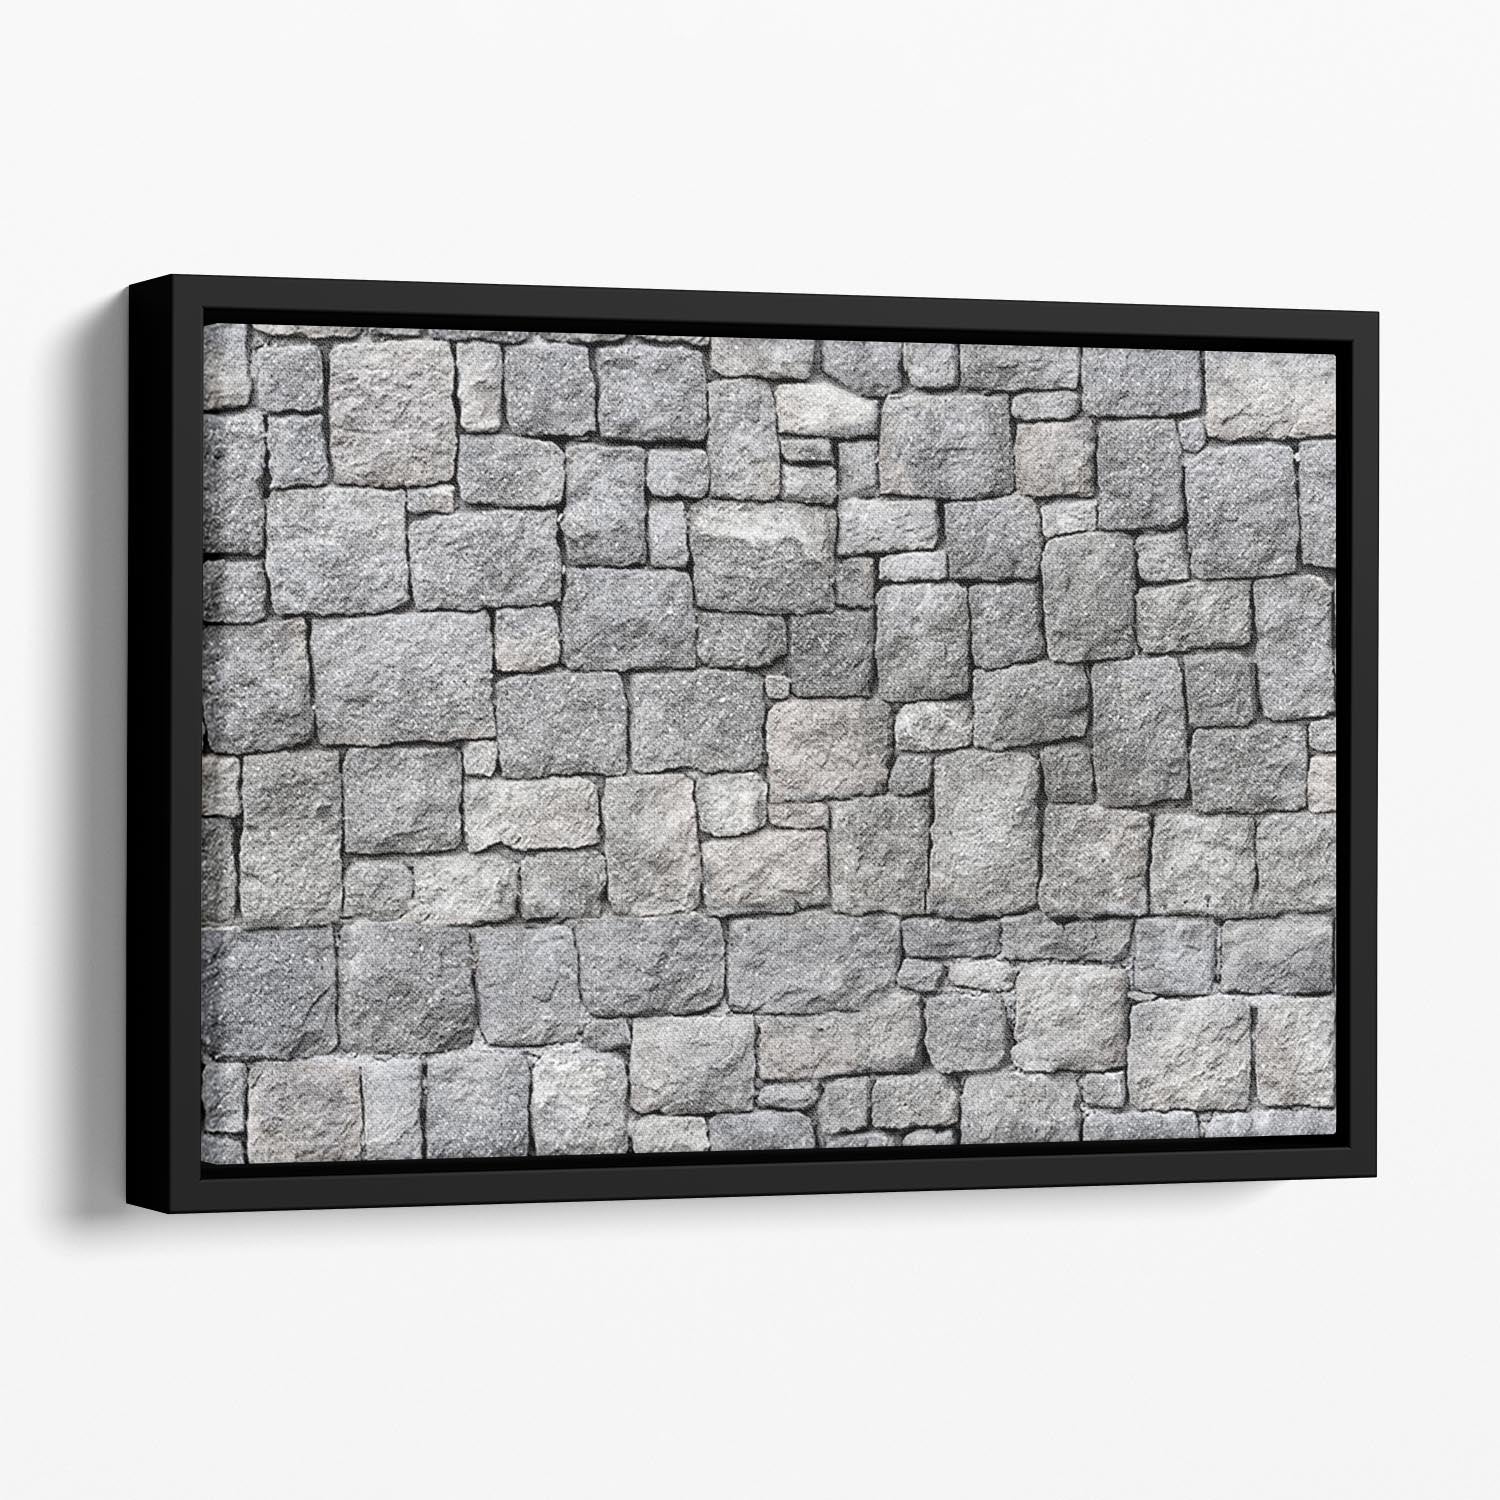 Old gray stone wall Floating Framed Canvas - Canvas Art Rocks - 1